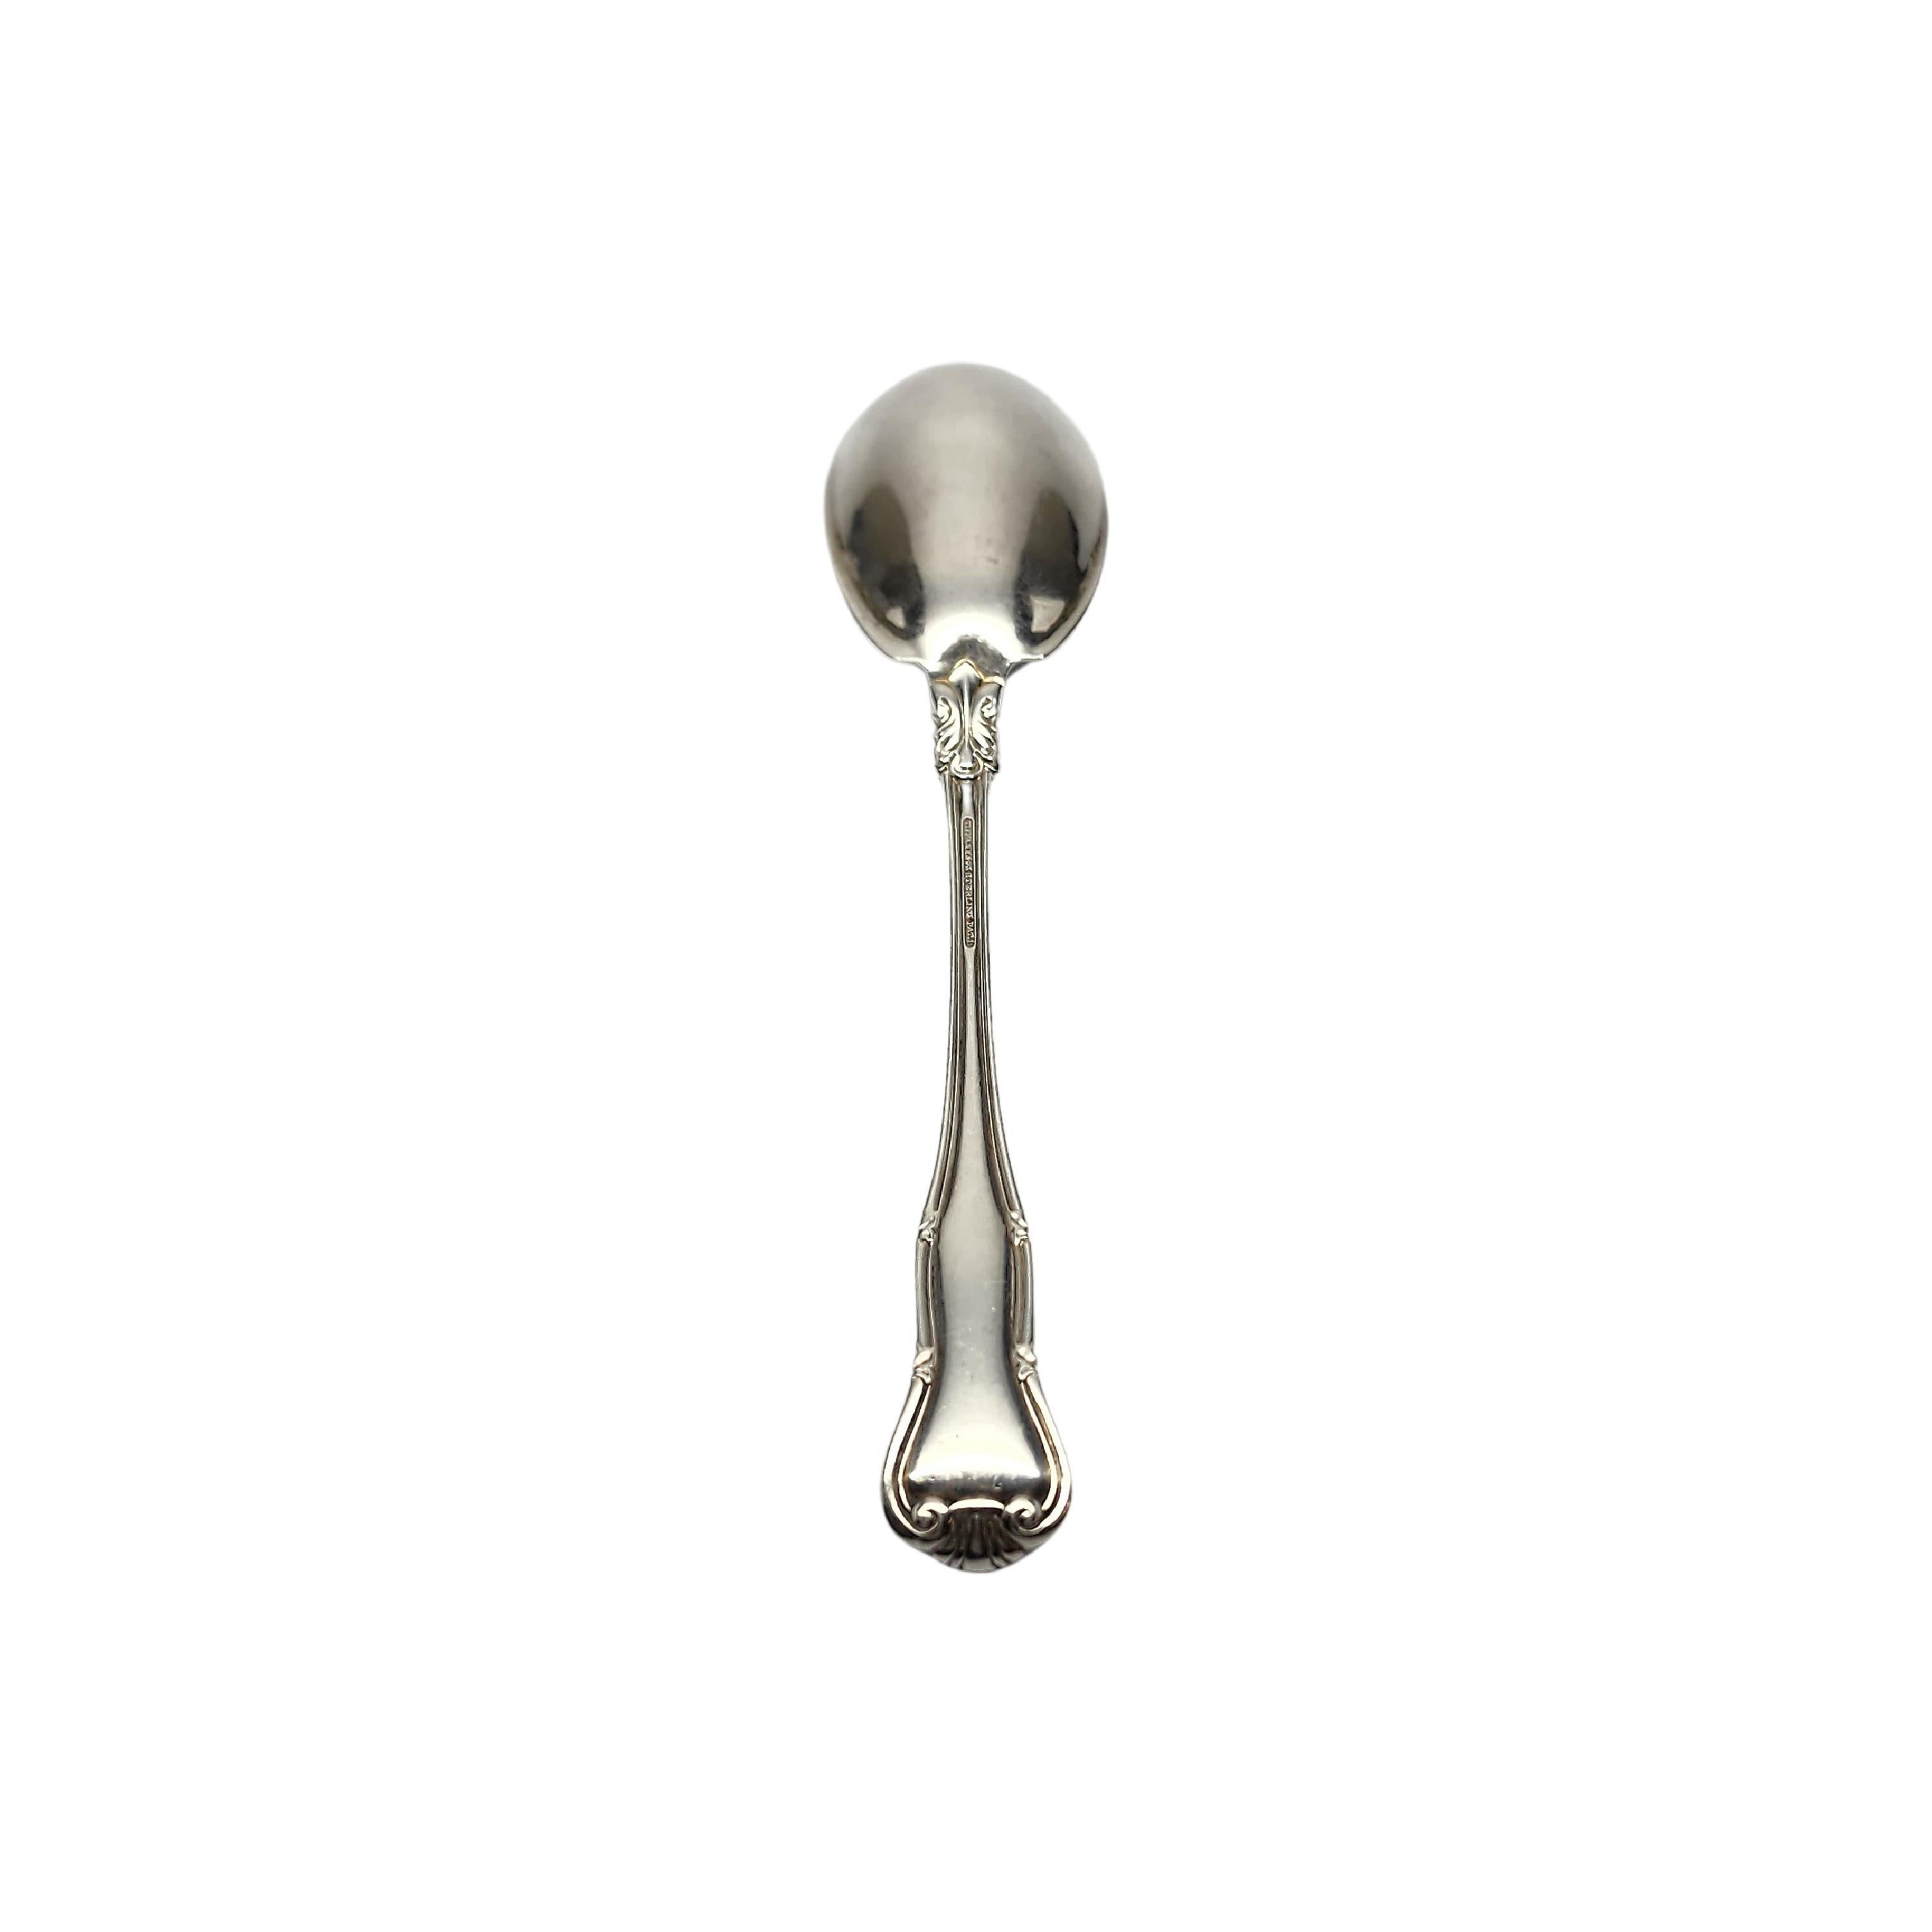 Sterling silver preserve spoon by Tiffany & Co in the Provence pattern with monogram.

Monogram appears to be U

Introduced in 1961, the Provence pattern features a crested arch, inspired by 18th Century French motifs. Hallmarks date this piece to